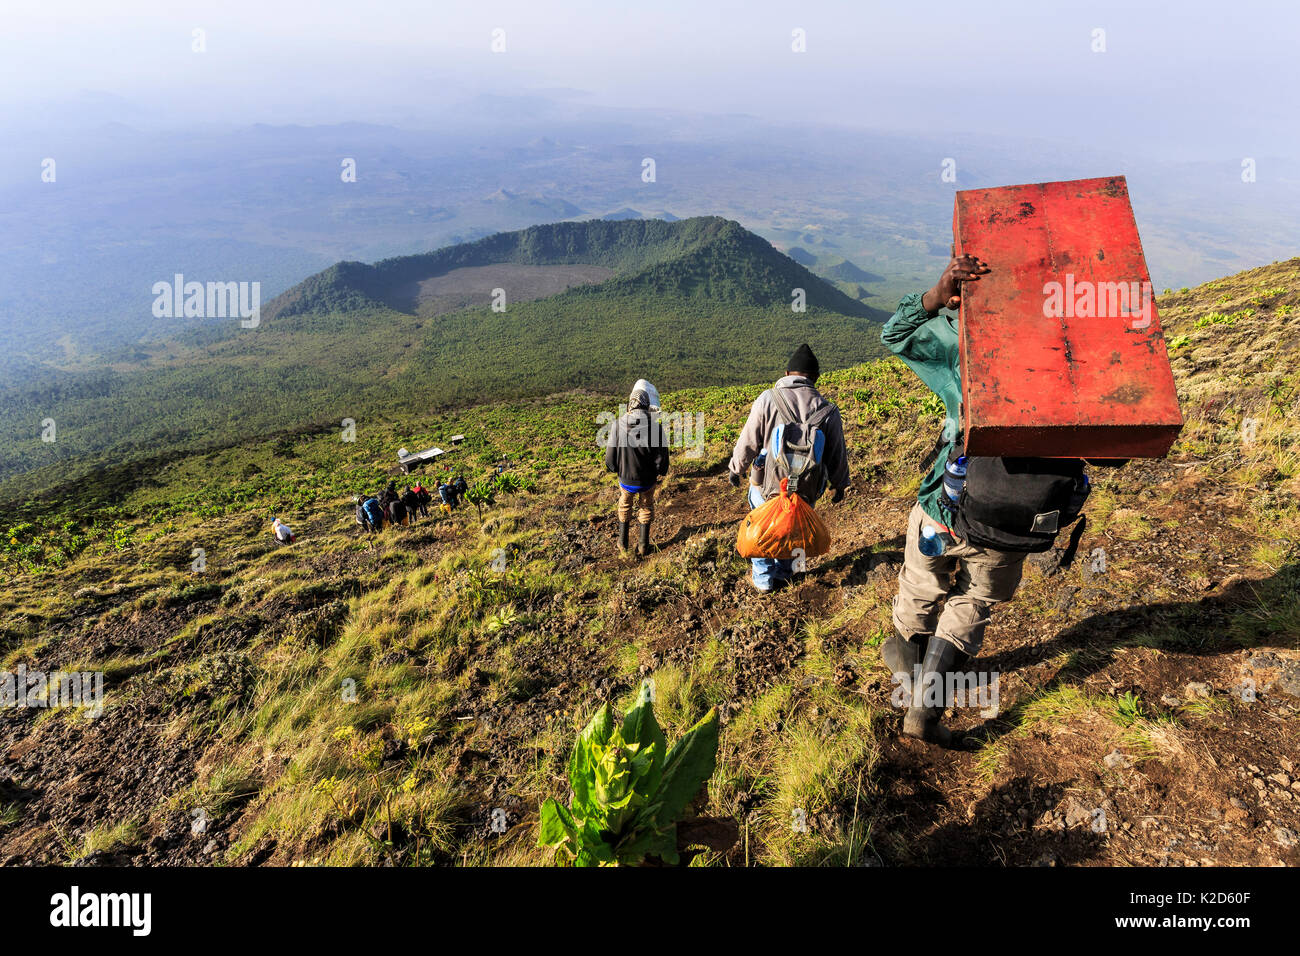 Porters carrying luggage and equipment down from the Nyiragongo Volcano, Democratic Republic of Congo (RDC). September 2015. Stock Photo